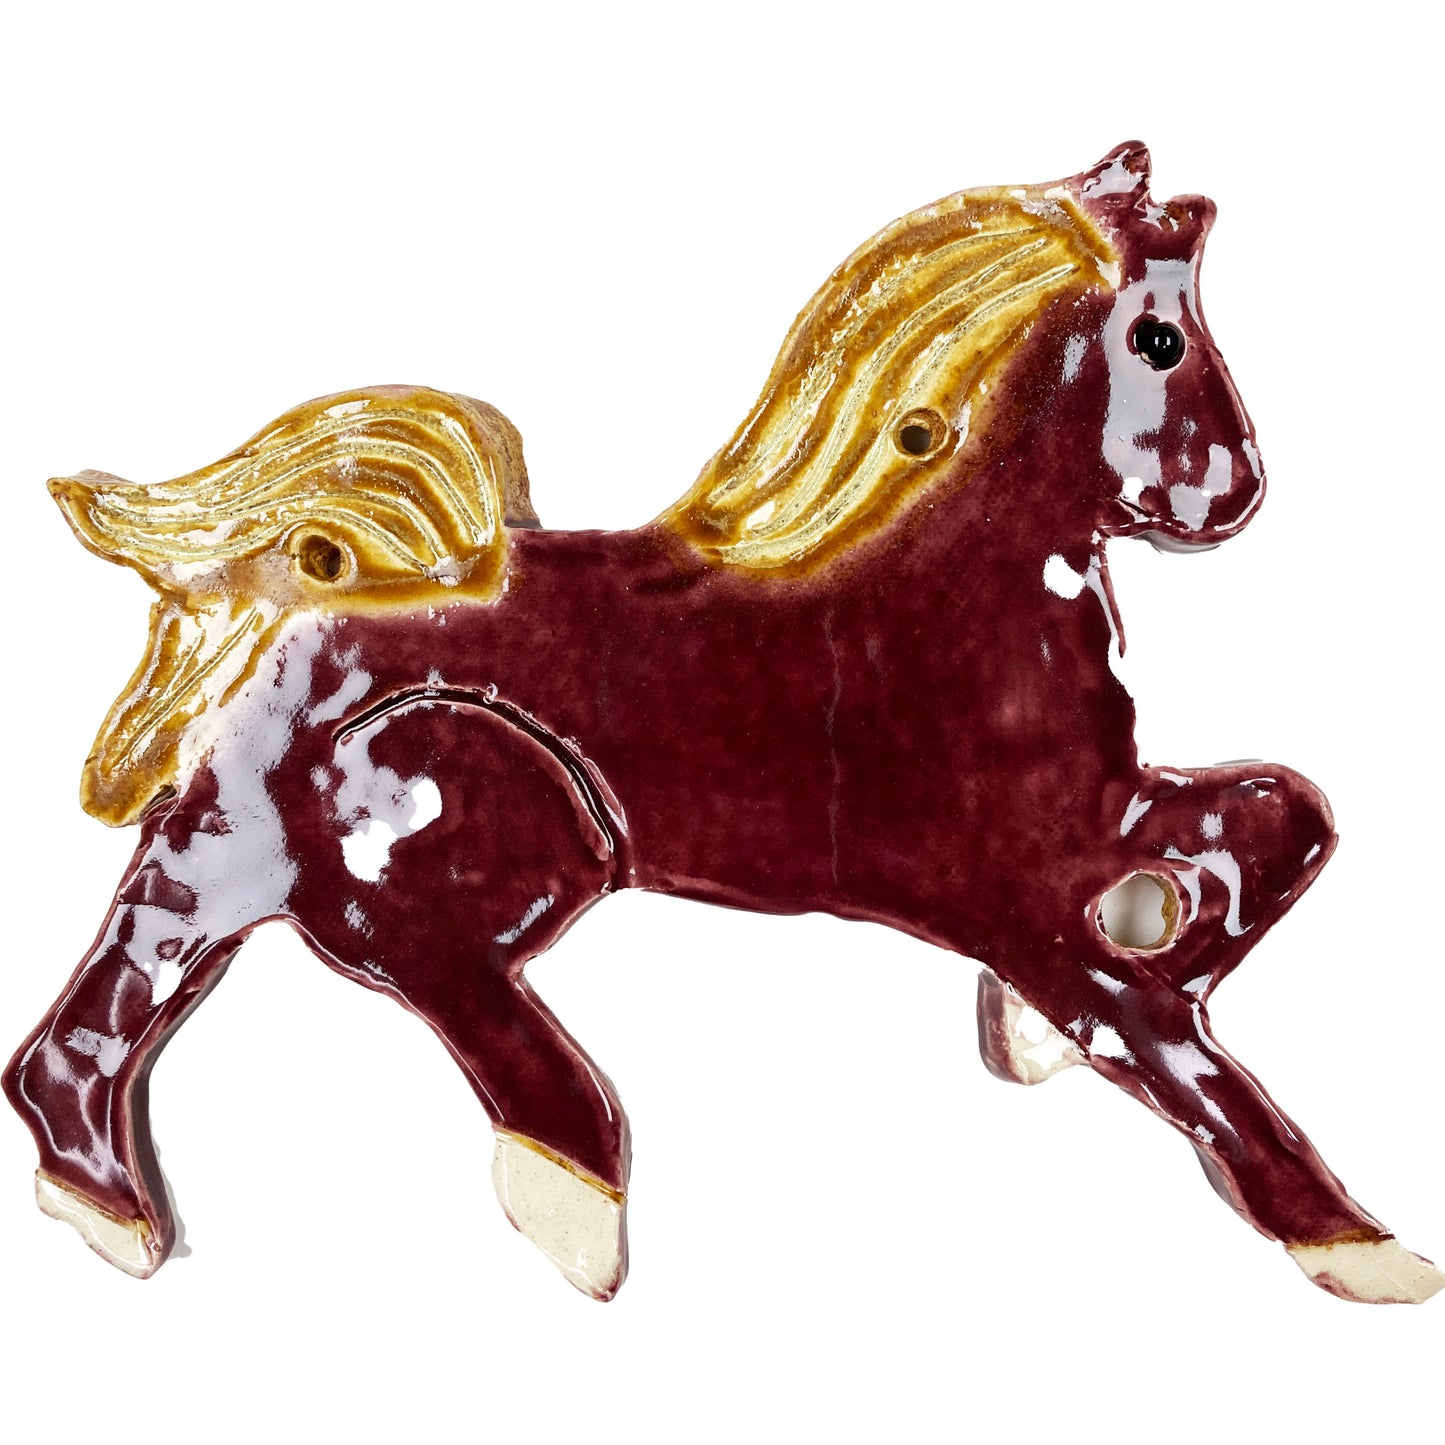 WATCH Resources Art Guild - Ceramic Arts Handmade Clay Crafts 9-inch x 7-inch Glazed Horse made by Izzy Terry